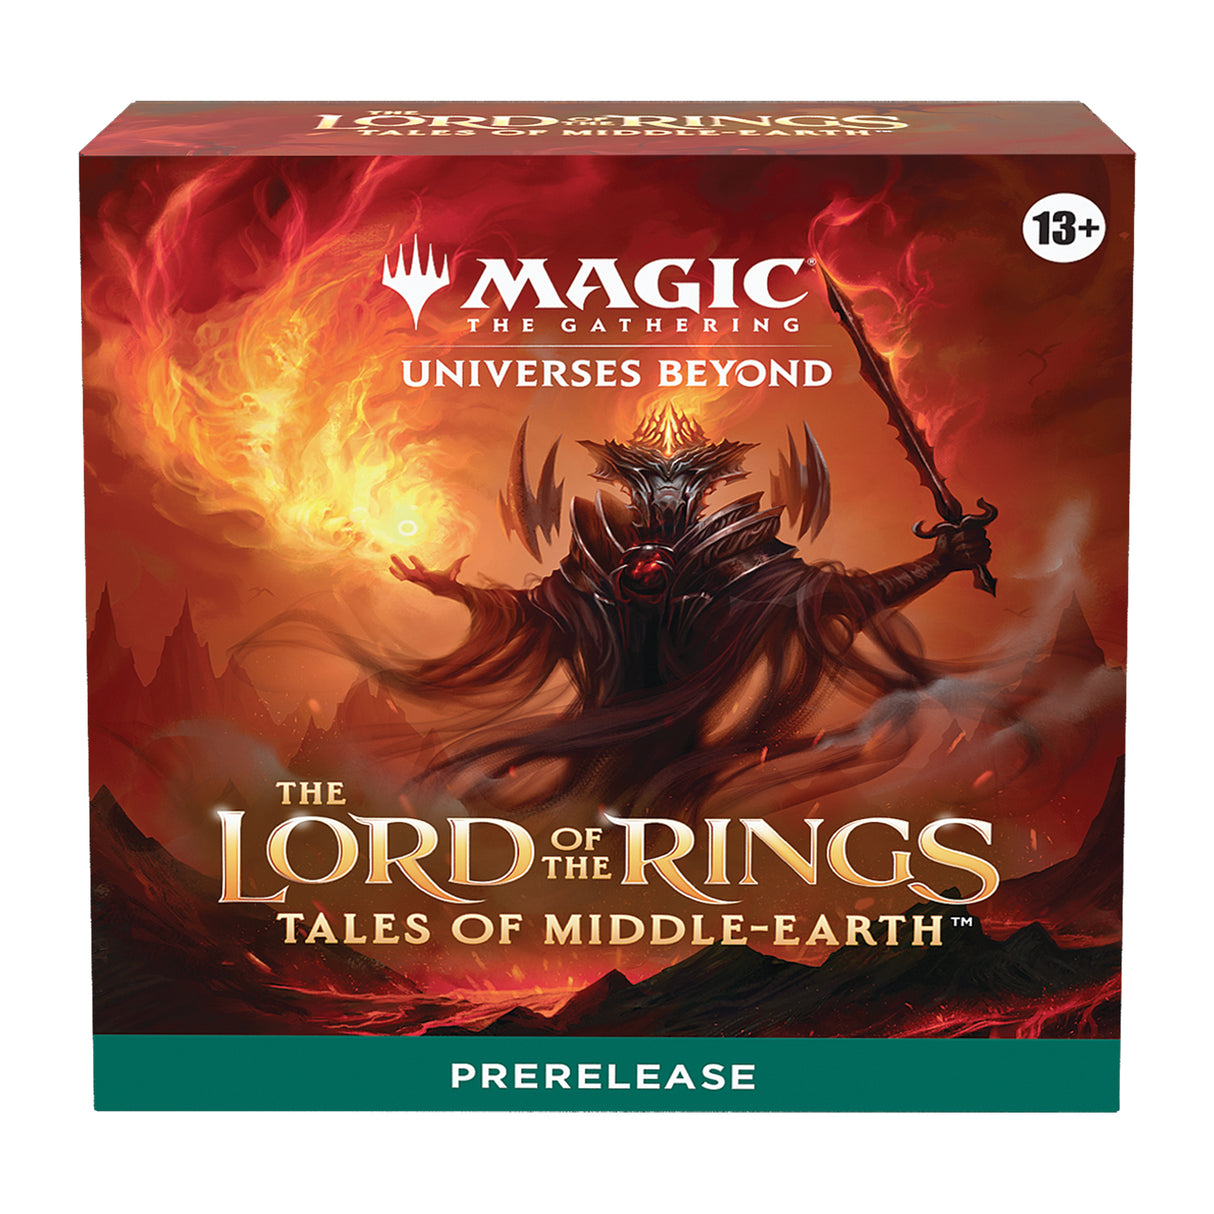 The Lord of the Rings: Tales of Middle-earth (LTR) - Prerelease Kit